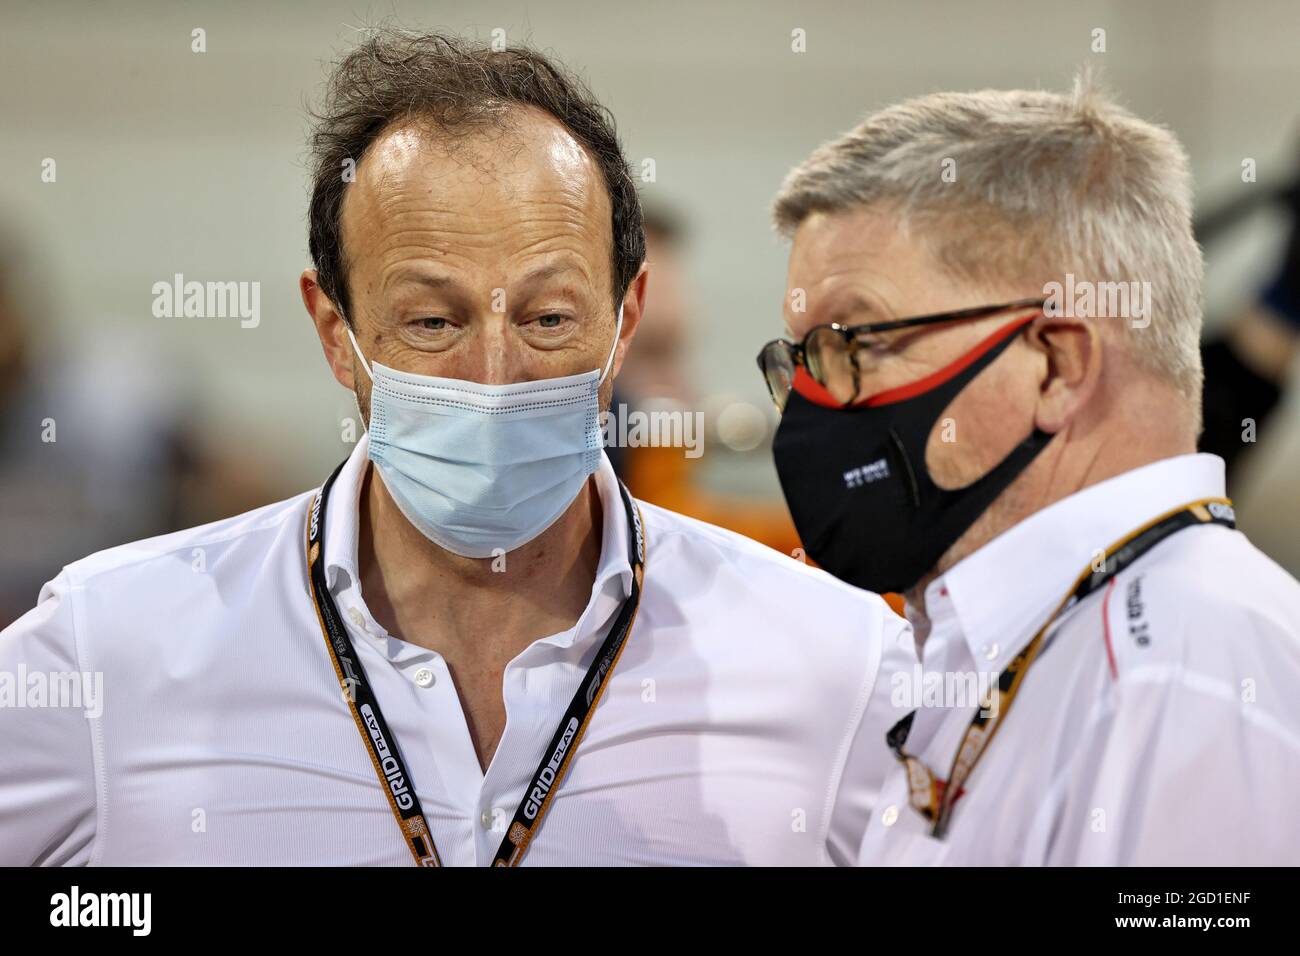 (L to R): Peter Bayer, FIA Secretary General for Motor Sport with Ross Brawn (GBR) Managing Director, Motor Sports on the grid. Bahrain Grand Prix, Sunday 28th March 2021. Sakhir, Bahrain. Stock Photo